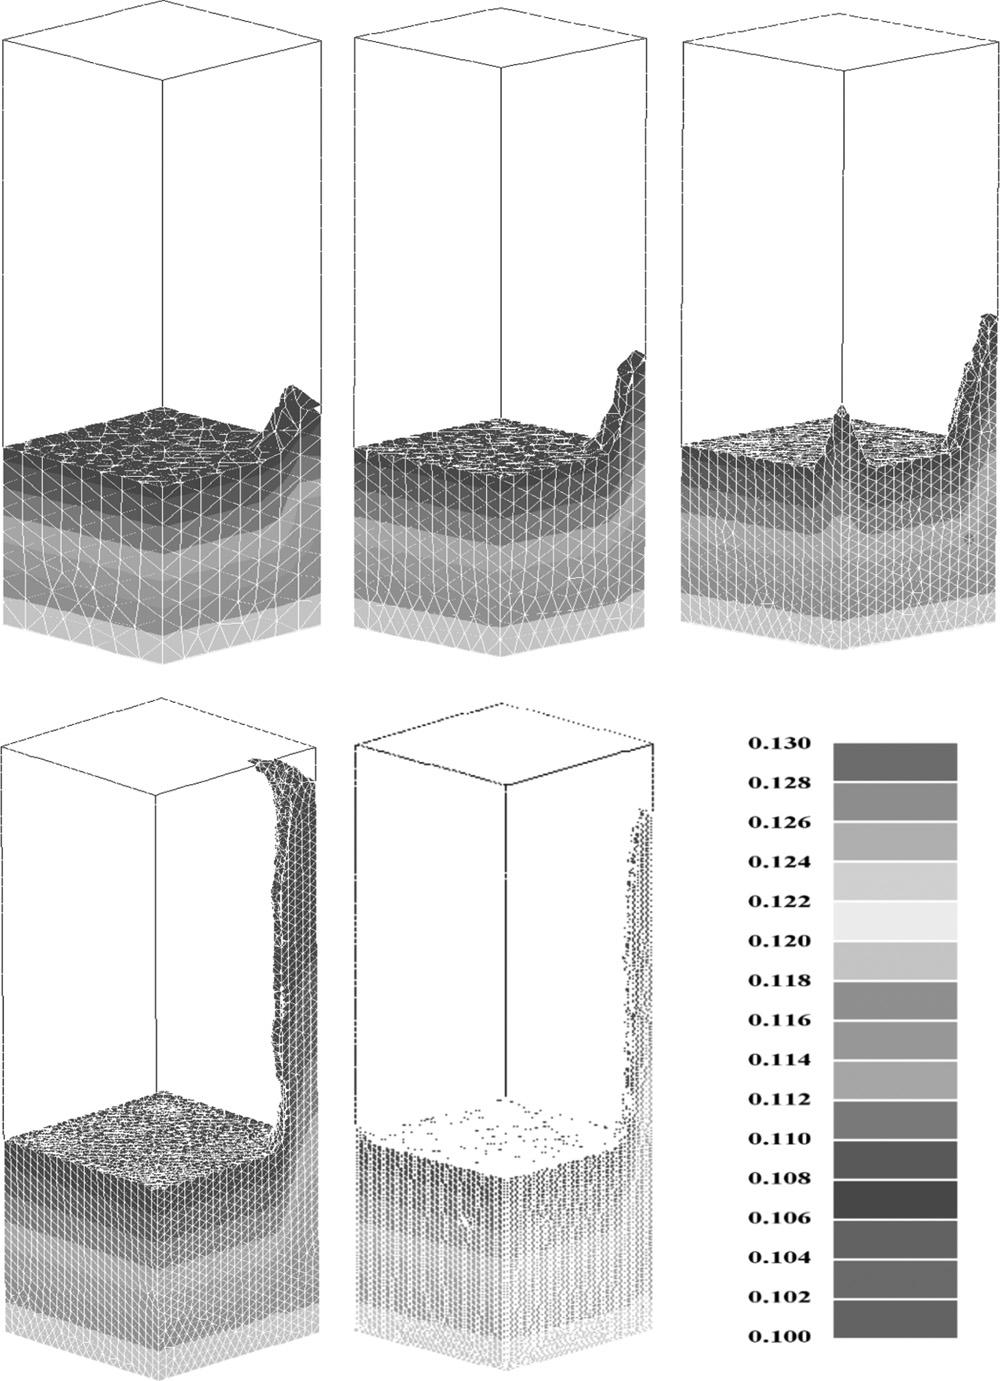 566 J. GUO AND C. BECKERMANN Figure 3. 3-D view of the liquid concentration field, C l,att ¼ 300 s for different grid sizes; clockwise from upper left: l ¼ 0: